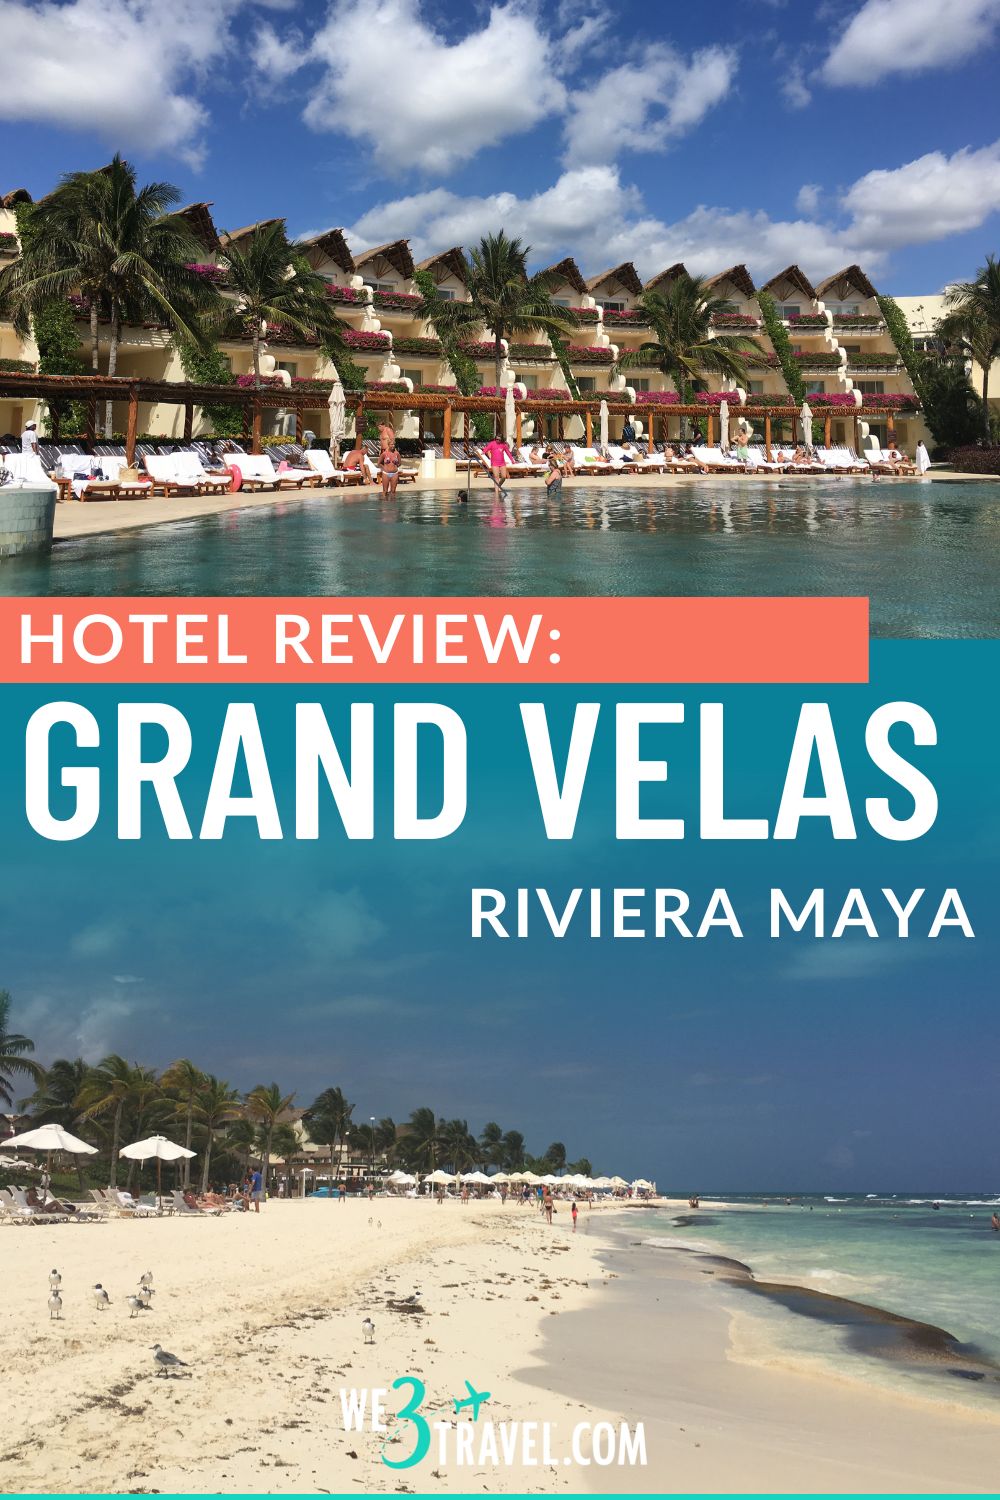 In this Grand Velas Riviera Maya review, I'll break down in detail the accommodations, amenities, dining, and spa for this family-friendly all-inclusive resort near Cancun and Playa del Carmen in Mexico.